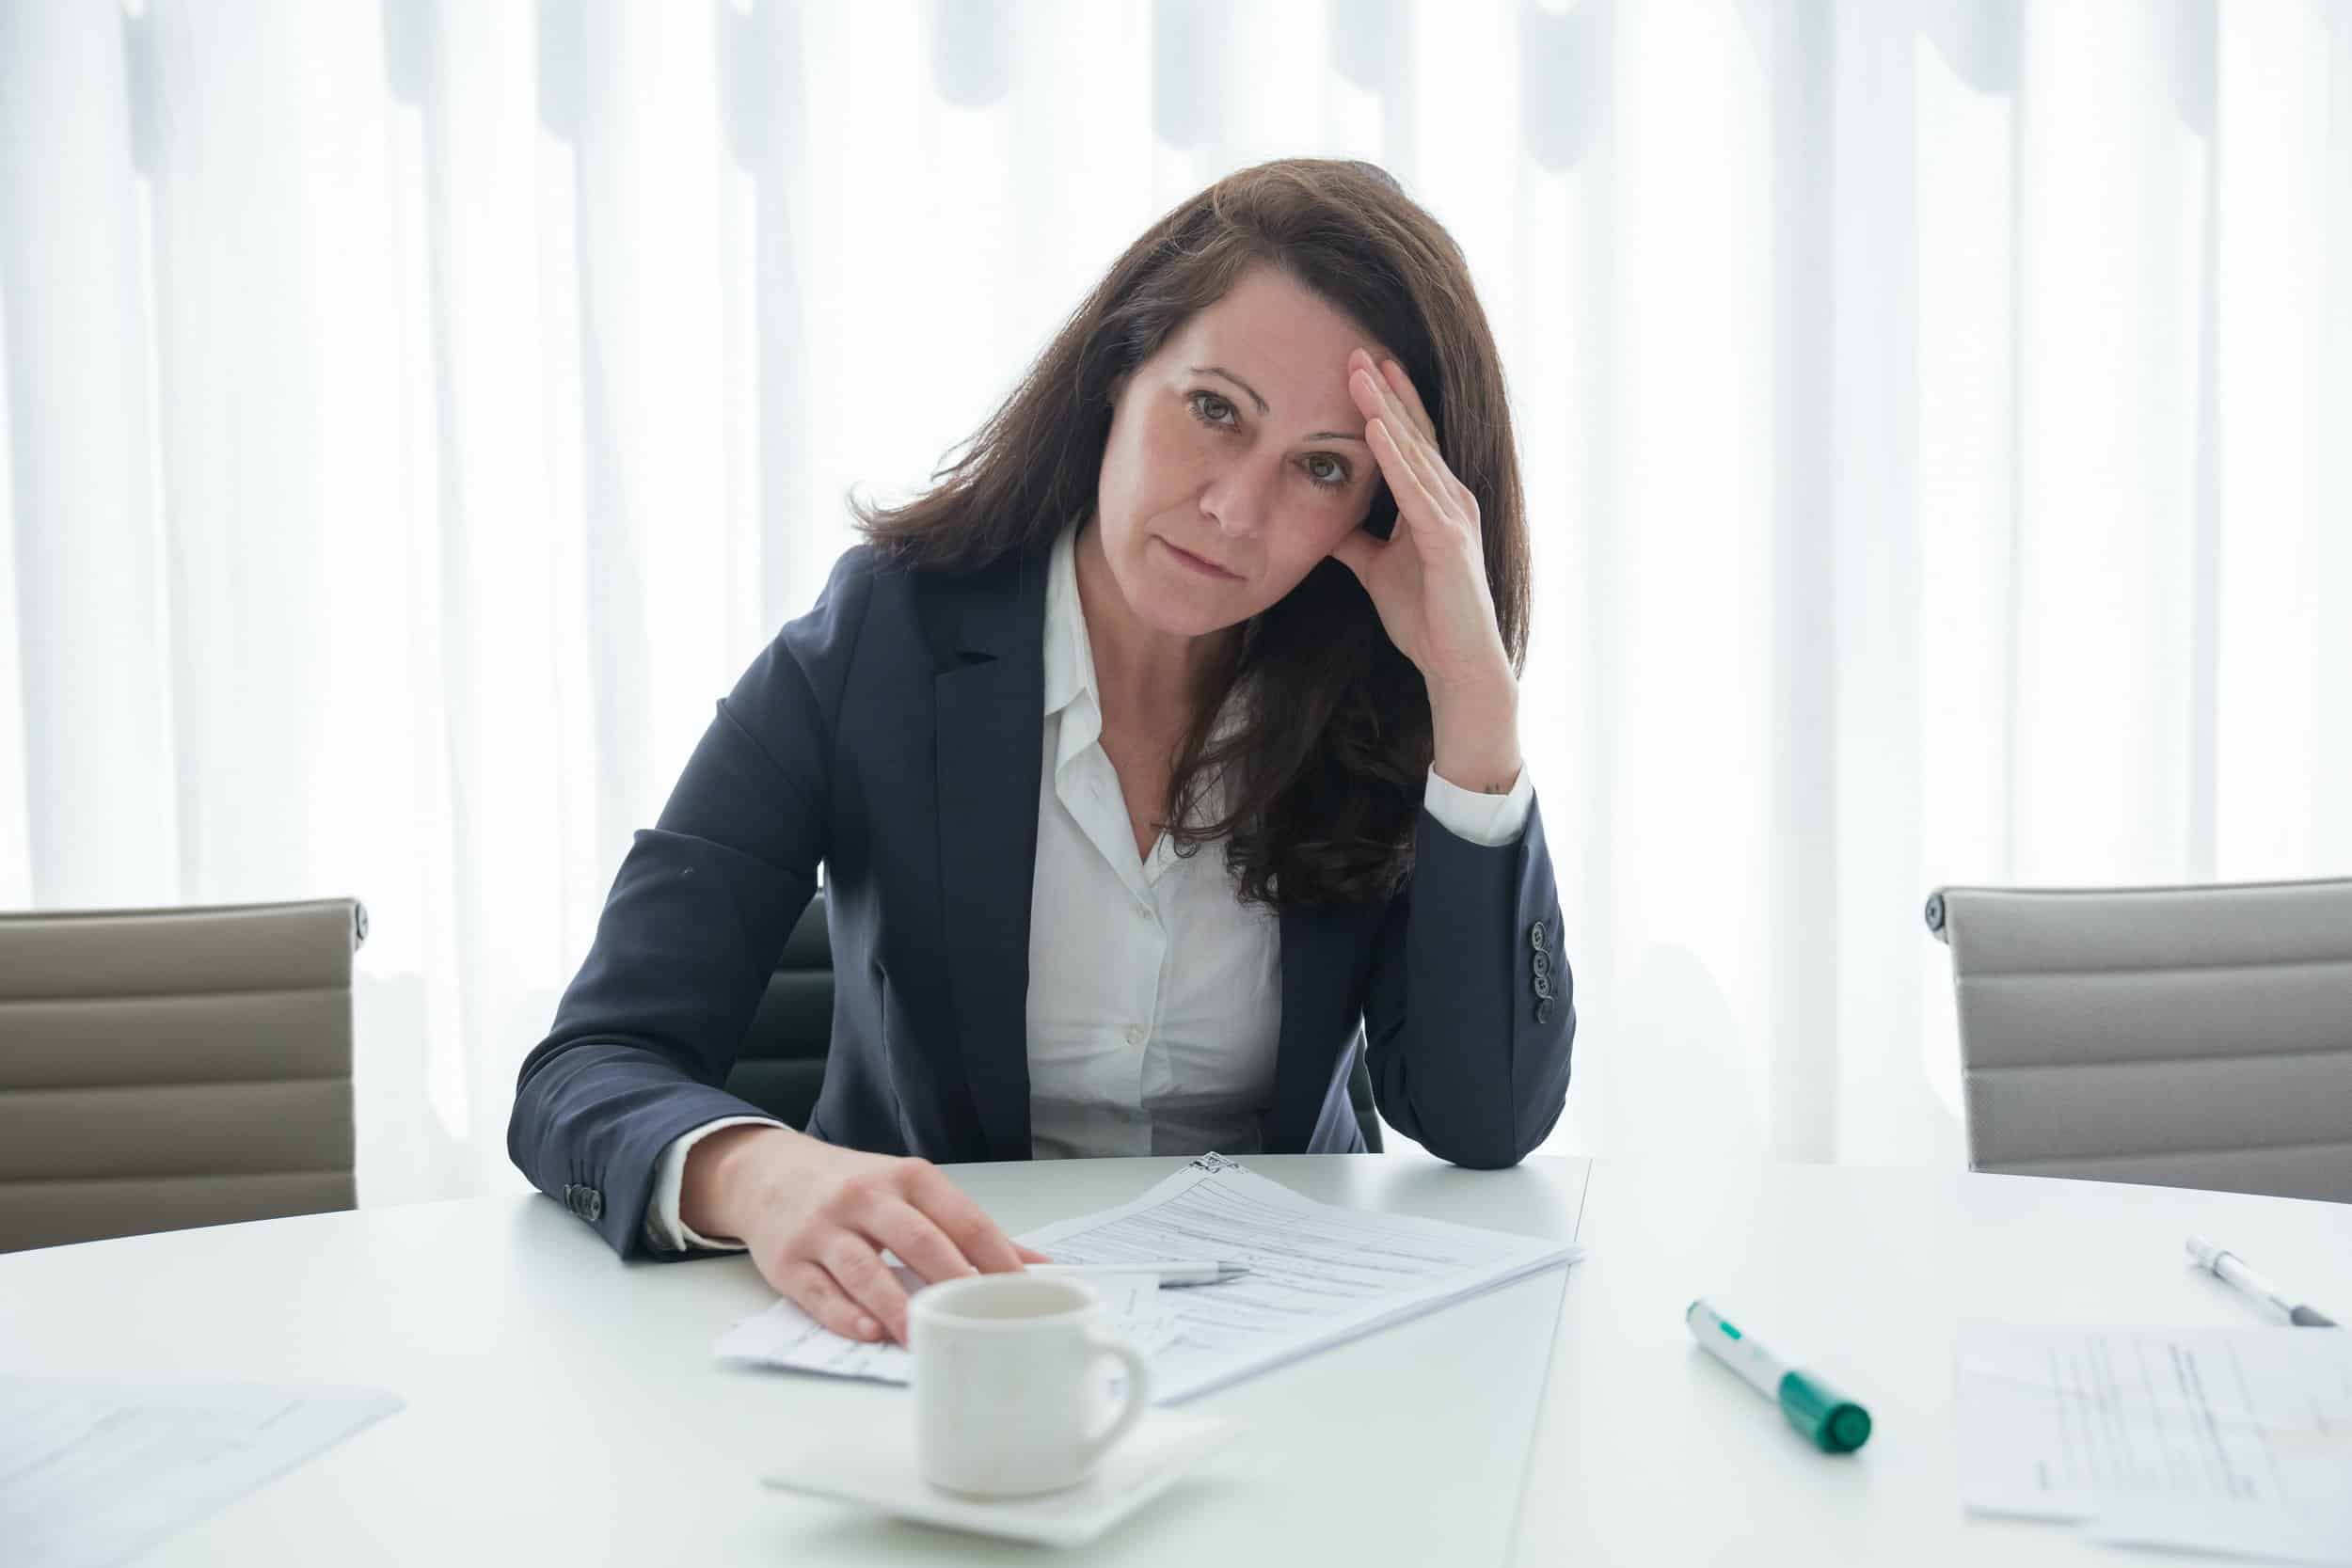 A professional woman is stressed at work and suffering from burnout.